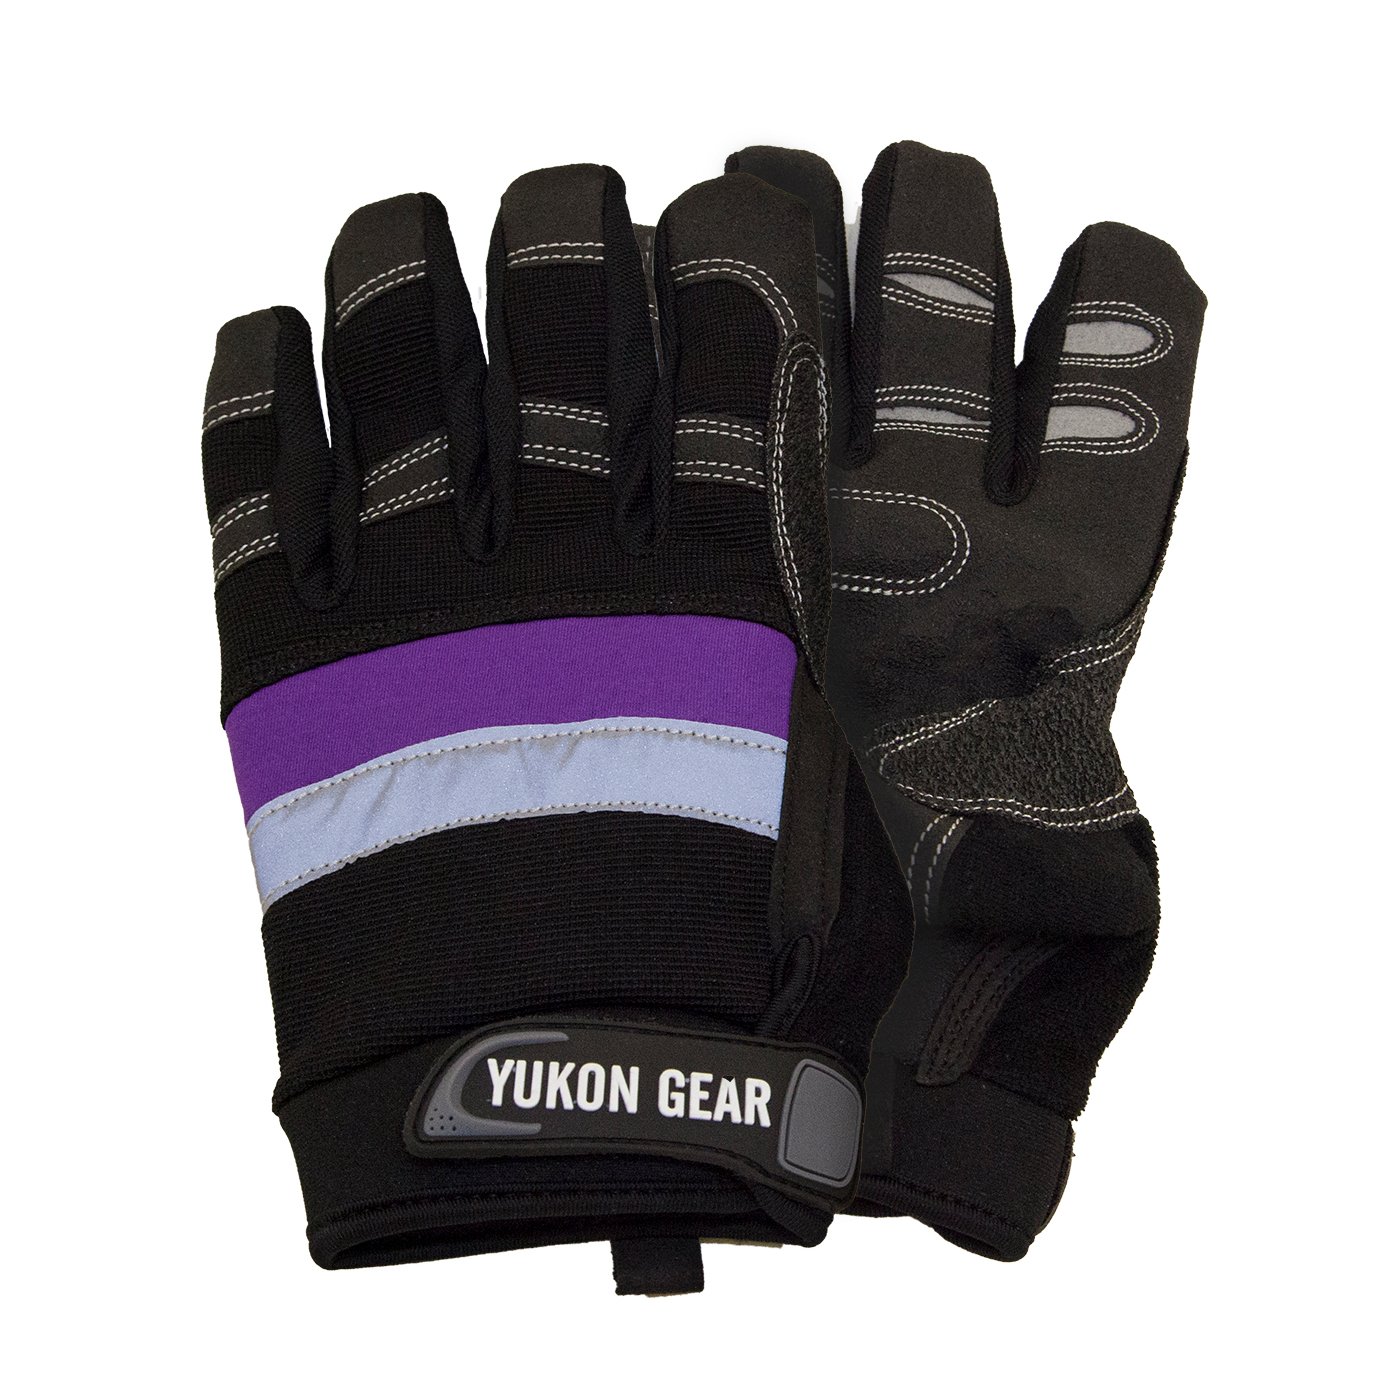 Recovery Gloves With Textured Rubber Palms And Fingers